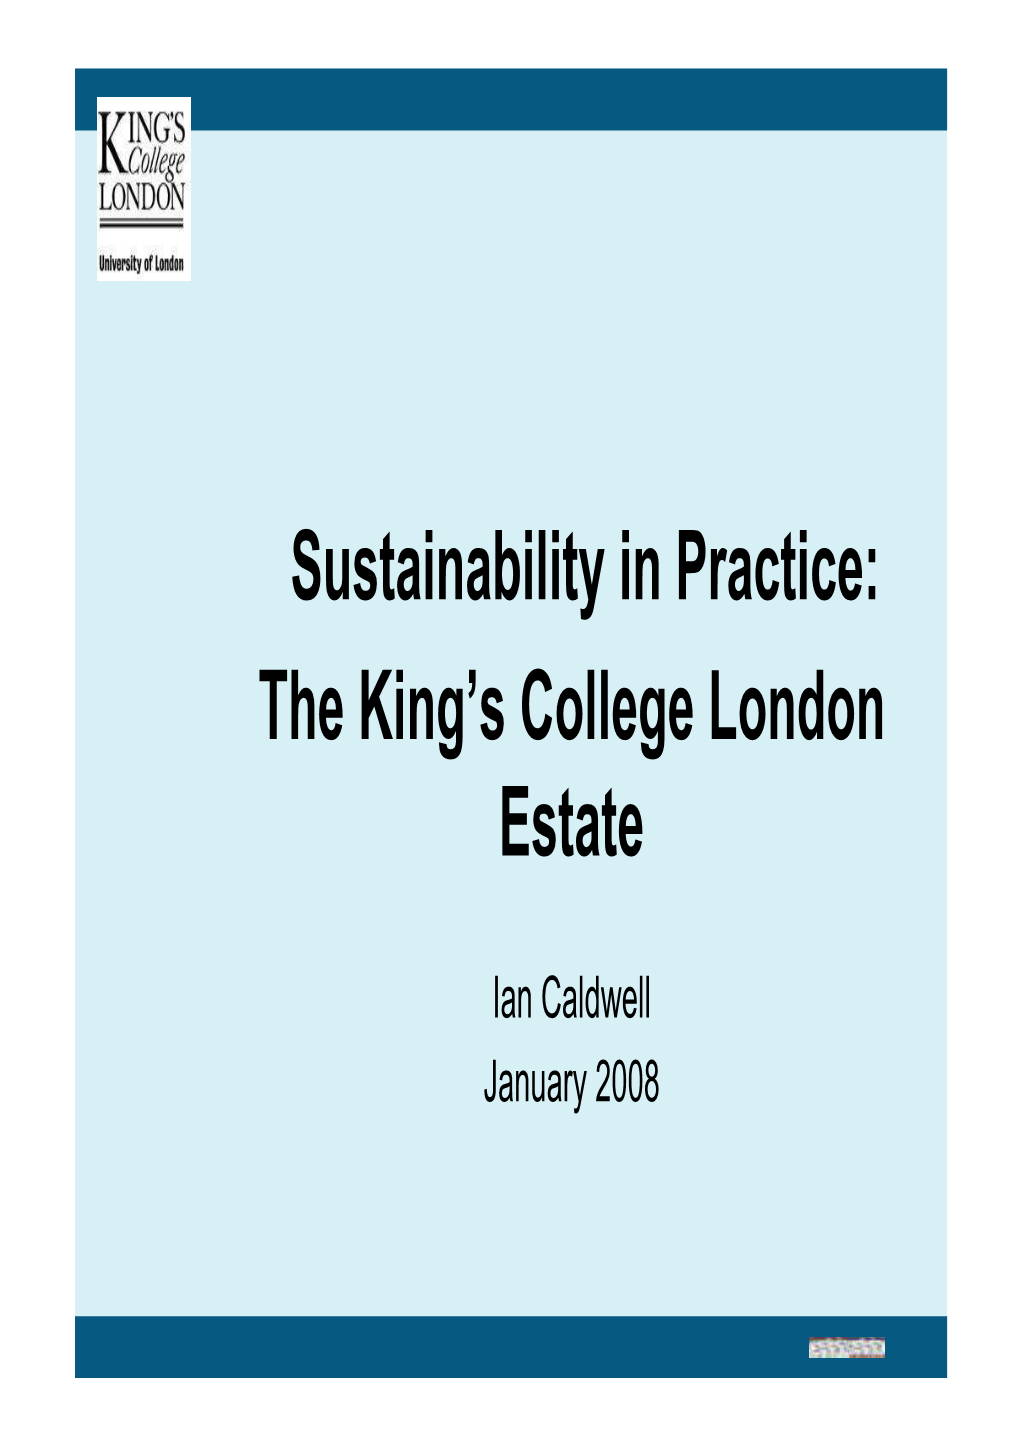 Sustainability in Practice: the King's College London Estate